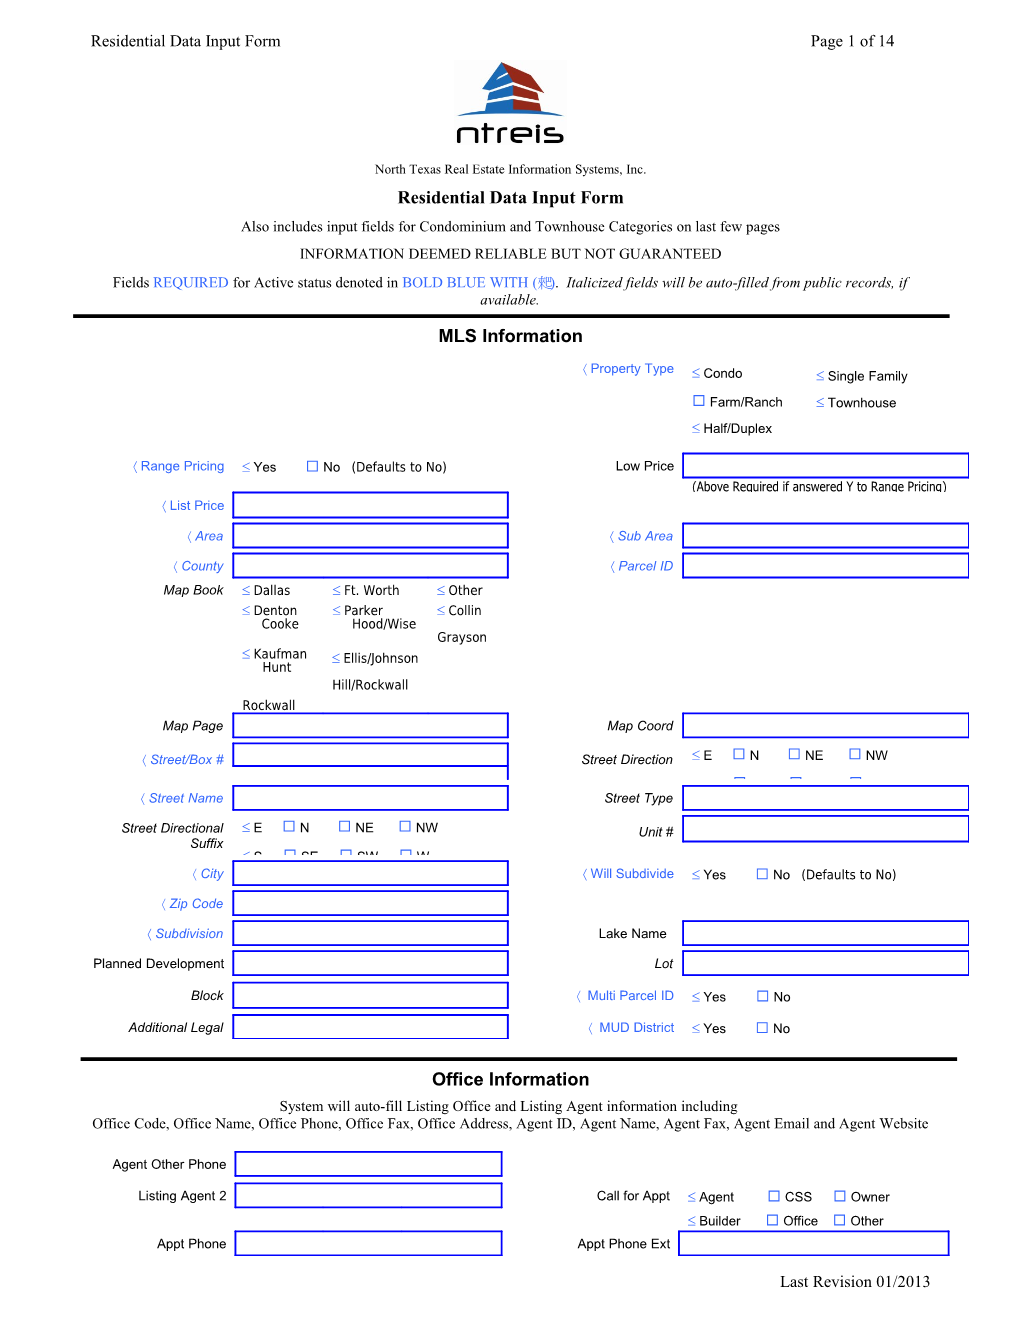 Residential Data Input Form Page 11 of 11